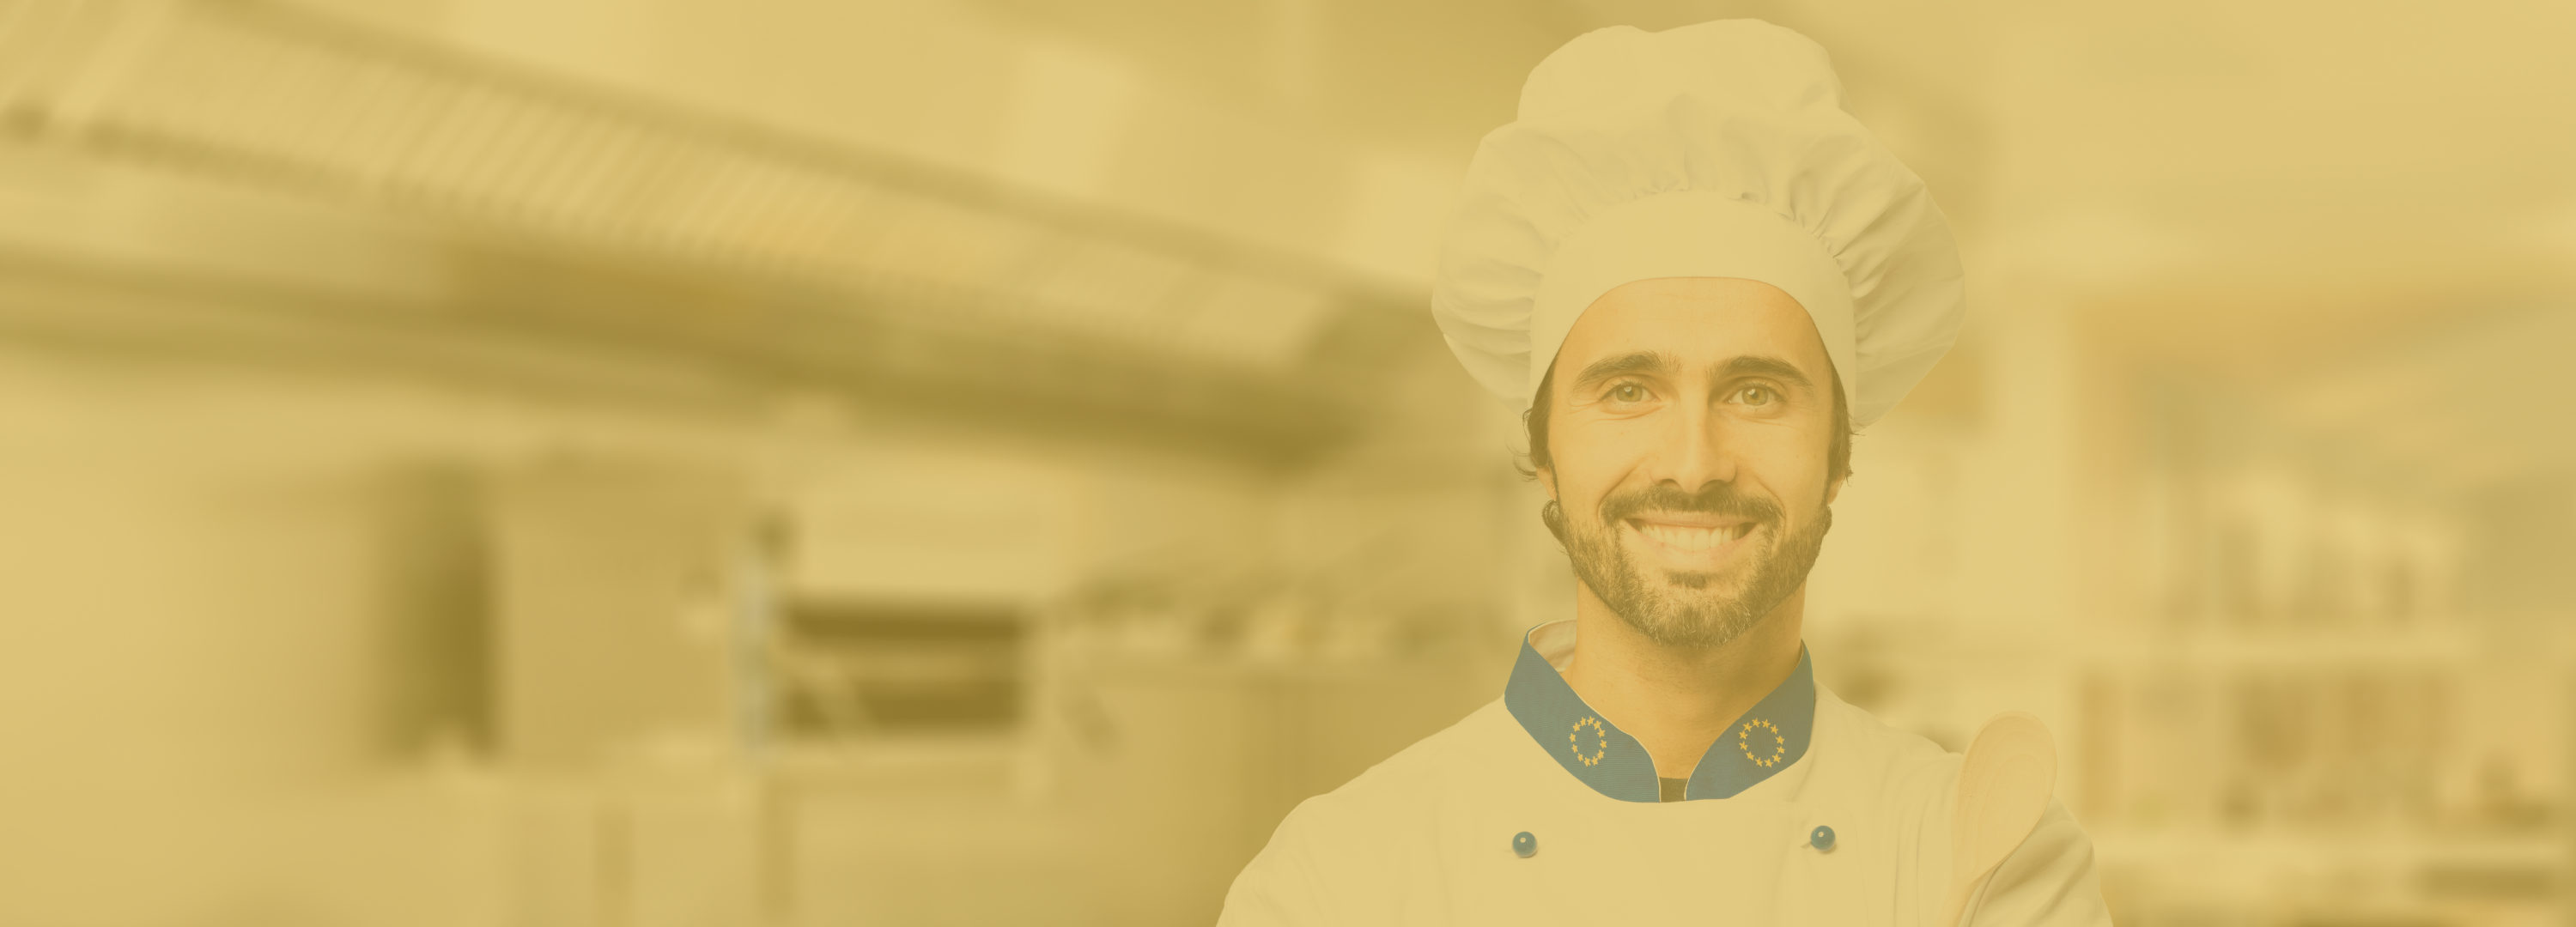 Are you a chef with an Extraordinary Ability? If yes, you may be eligible for a visa.